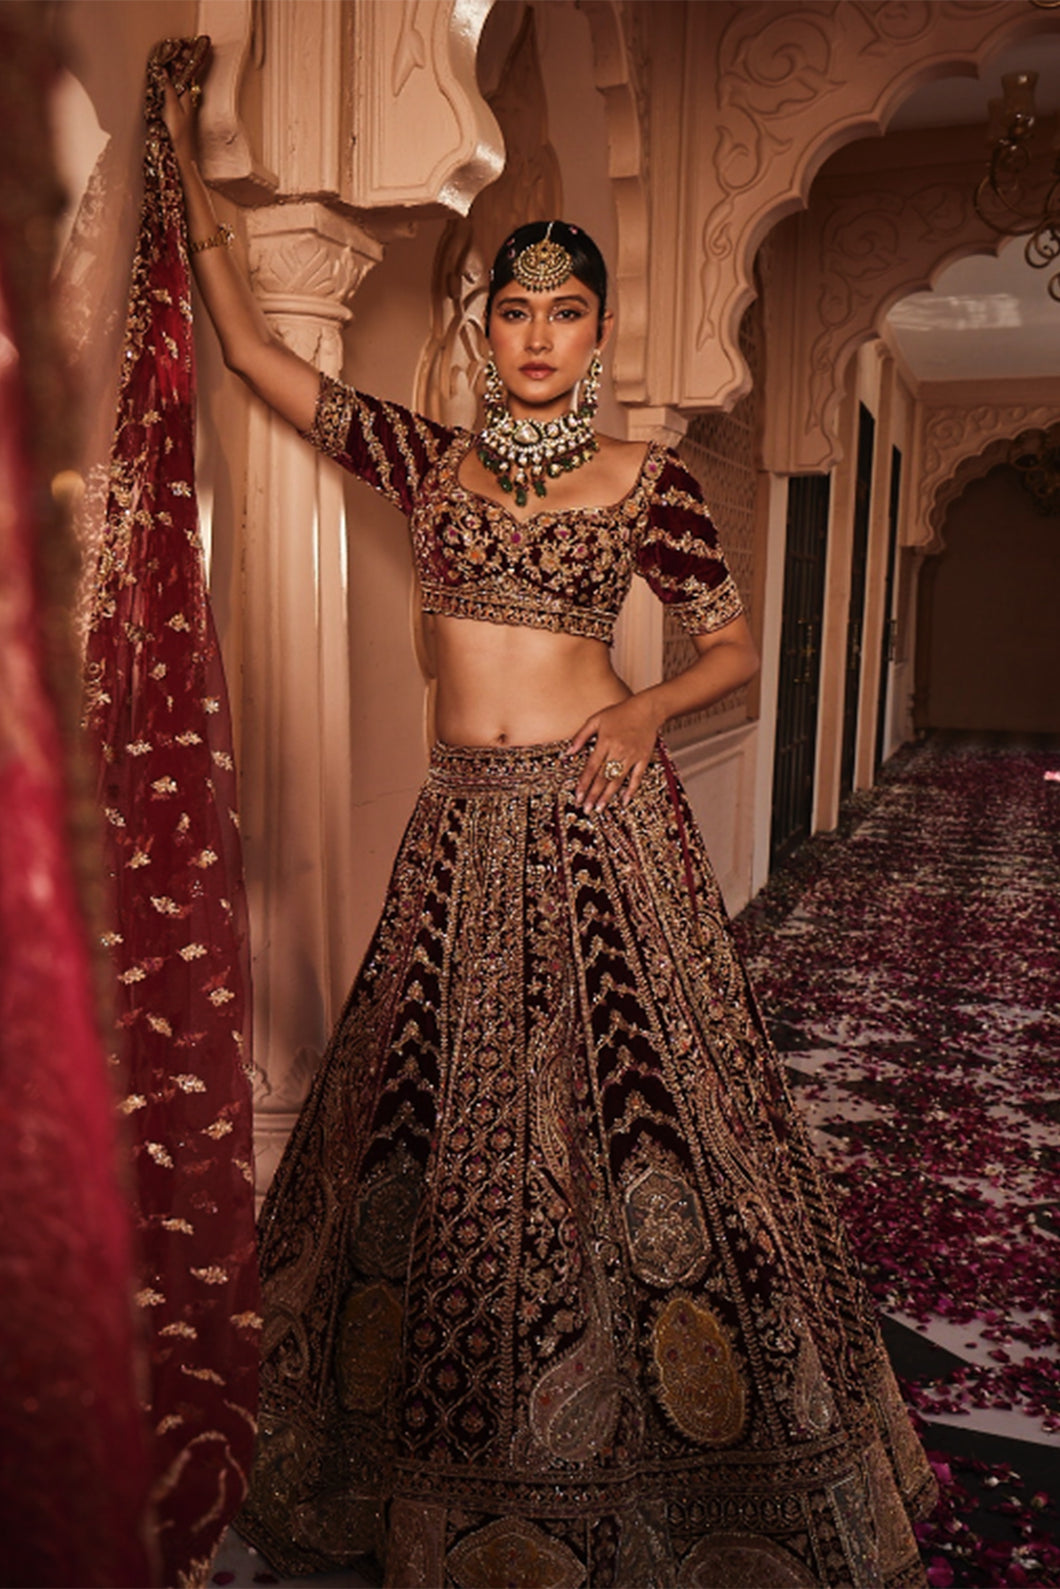 Red heavily embroidered lehenga